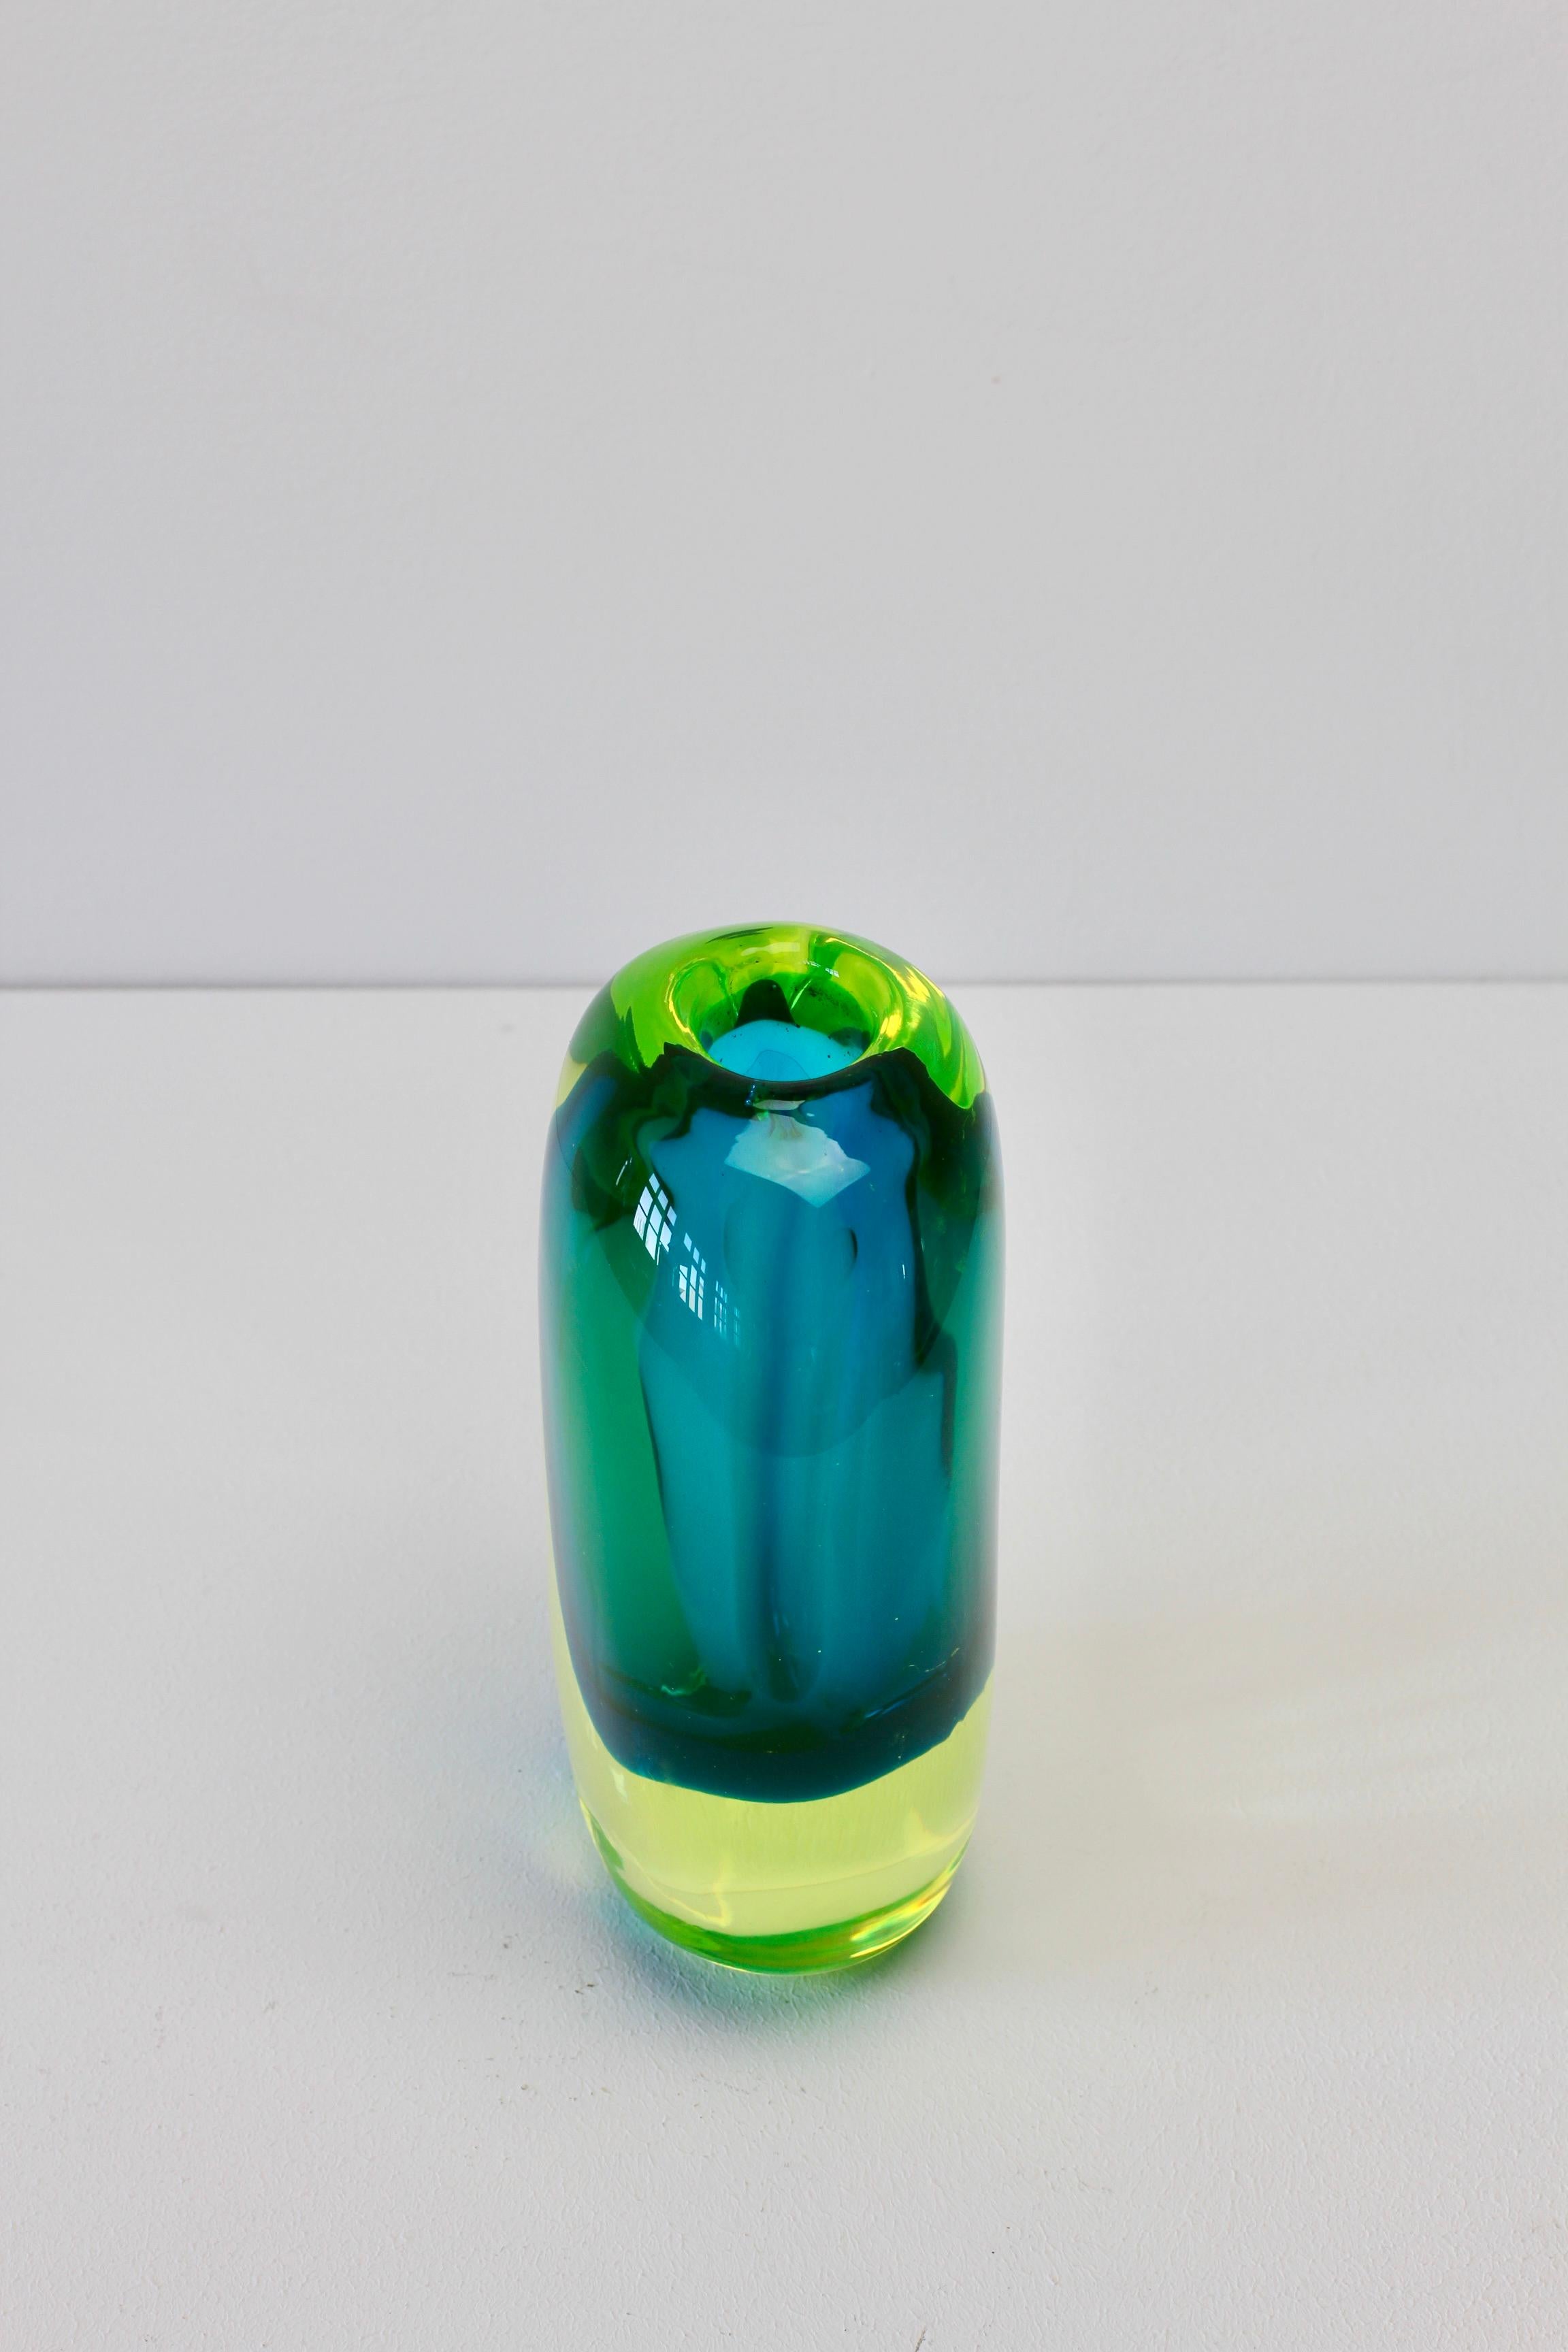 Yellow & Blue Italian Murano Sommerso Glass Vase c. 1970s Cenedese 'Attributed' 6